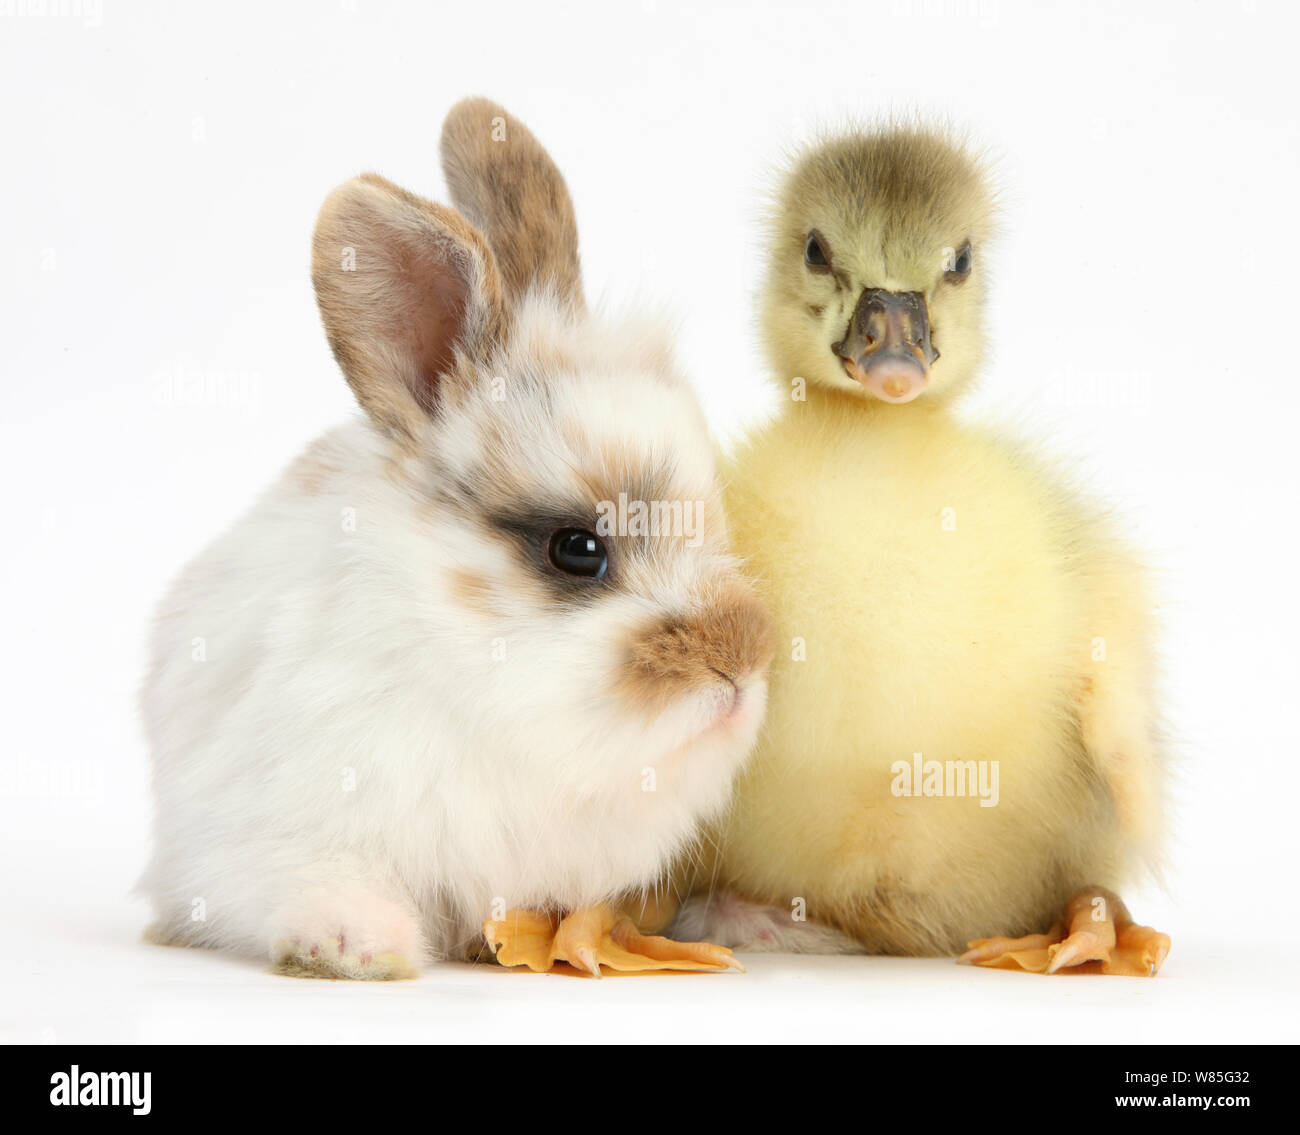 Gosling and baby bunny. Stock Photo